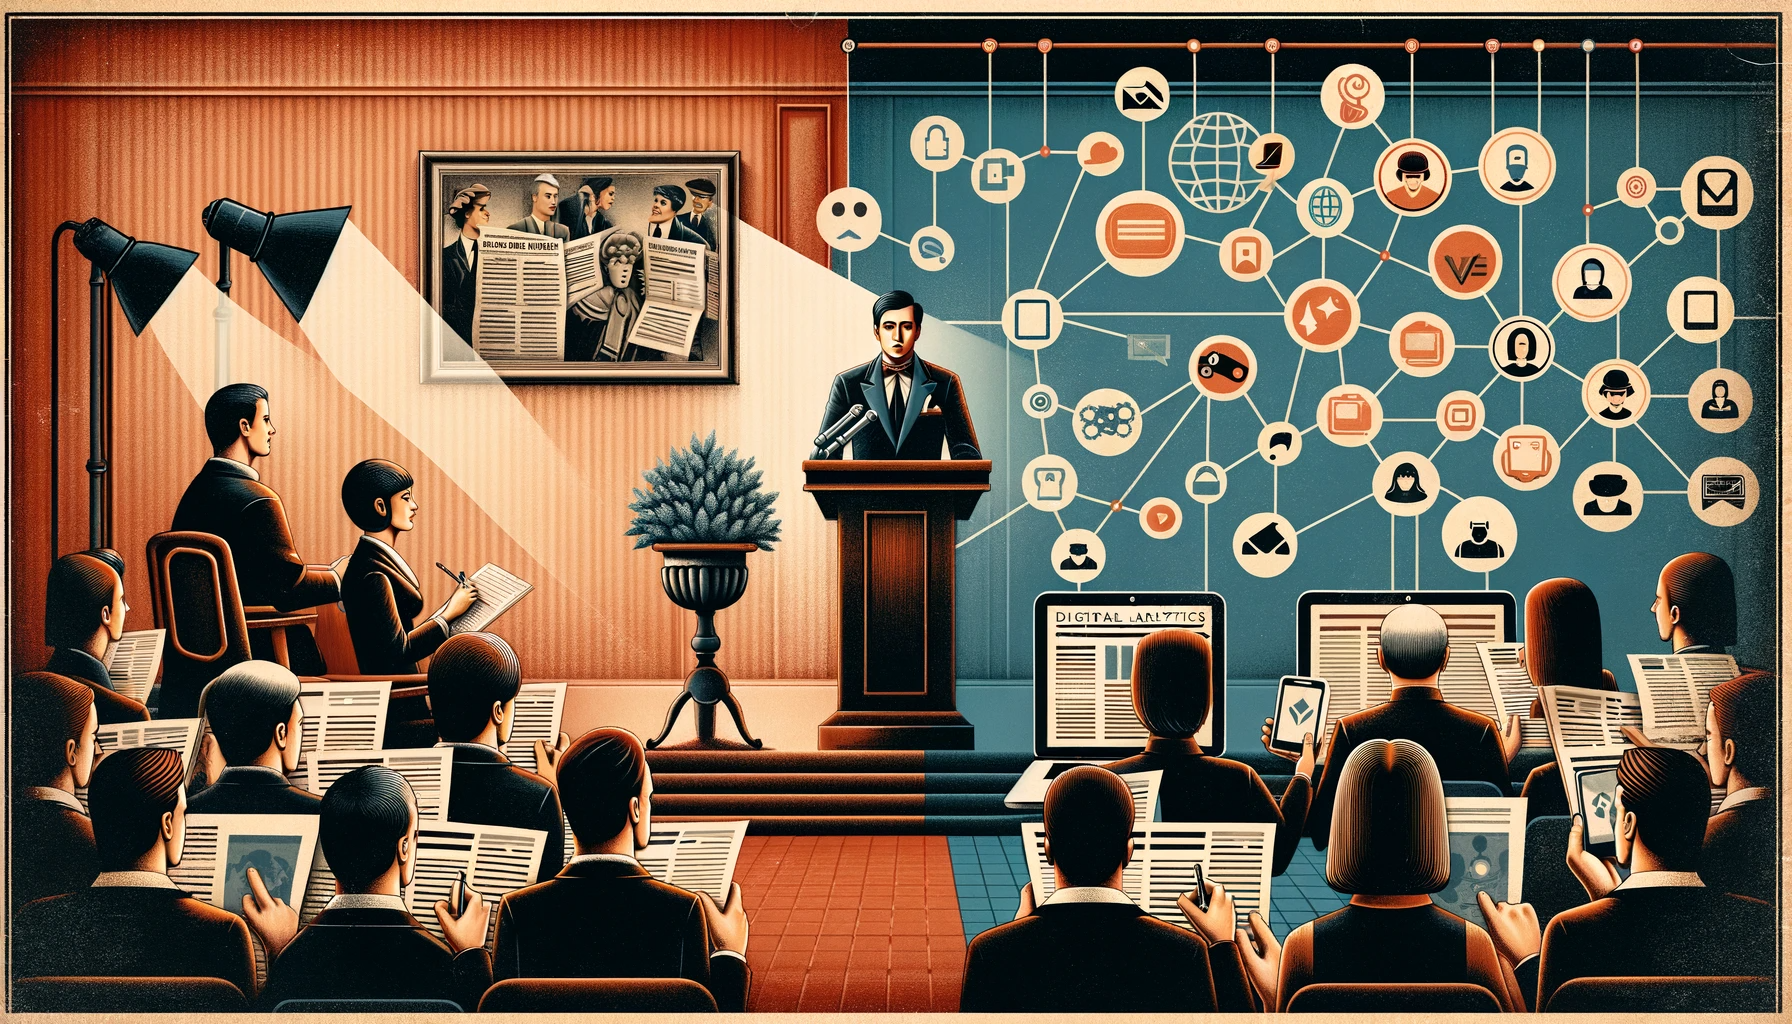 The image portrays a stark contrast between traditional and digital public relations (PR). On the left, traditional PR is depicted with a vintage ambiance: a person speaks at a podium in a press conference setting, surrounded by journalists taking notes, and newspapers are visible, evoking an old-fashioned feel. On the right, digital PR is represented with a modern, high-tech flair: a person engages with social media on a laptop, surrounded by digital analytics on screens, and a vibrant online community is symbolized by interconnected avatars. The two halves are distinctly separated, illustrating the evolution from traditional to digital methods in public relations.